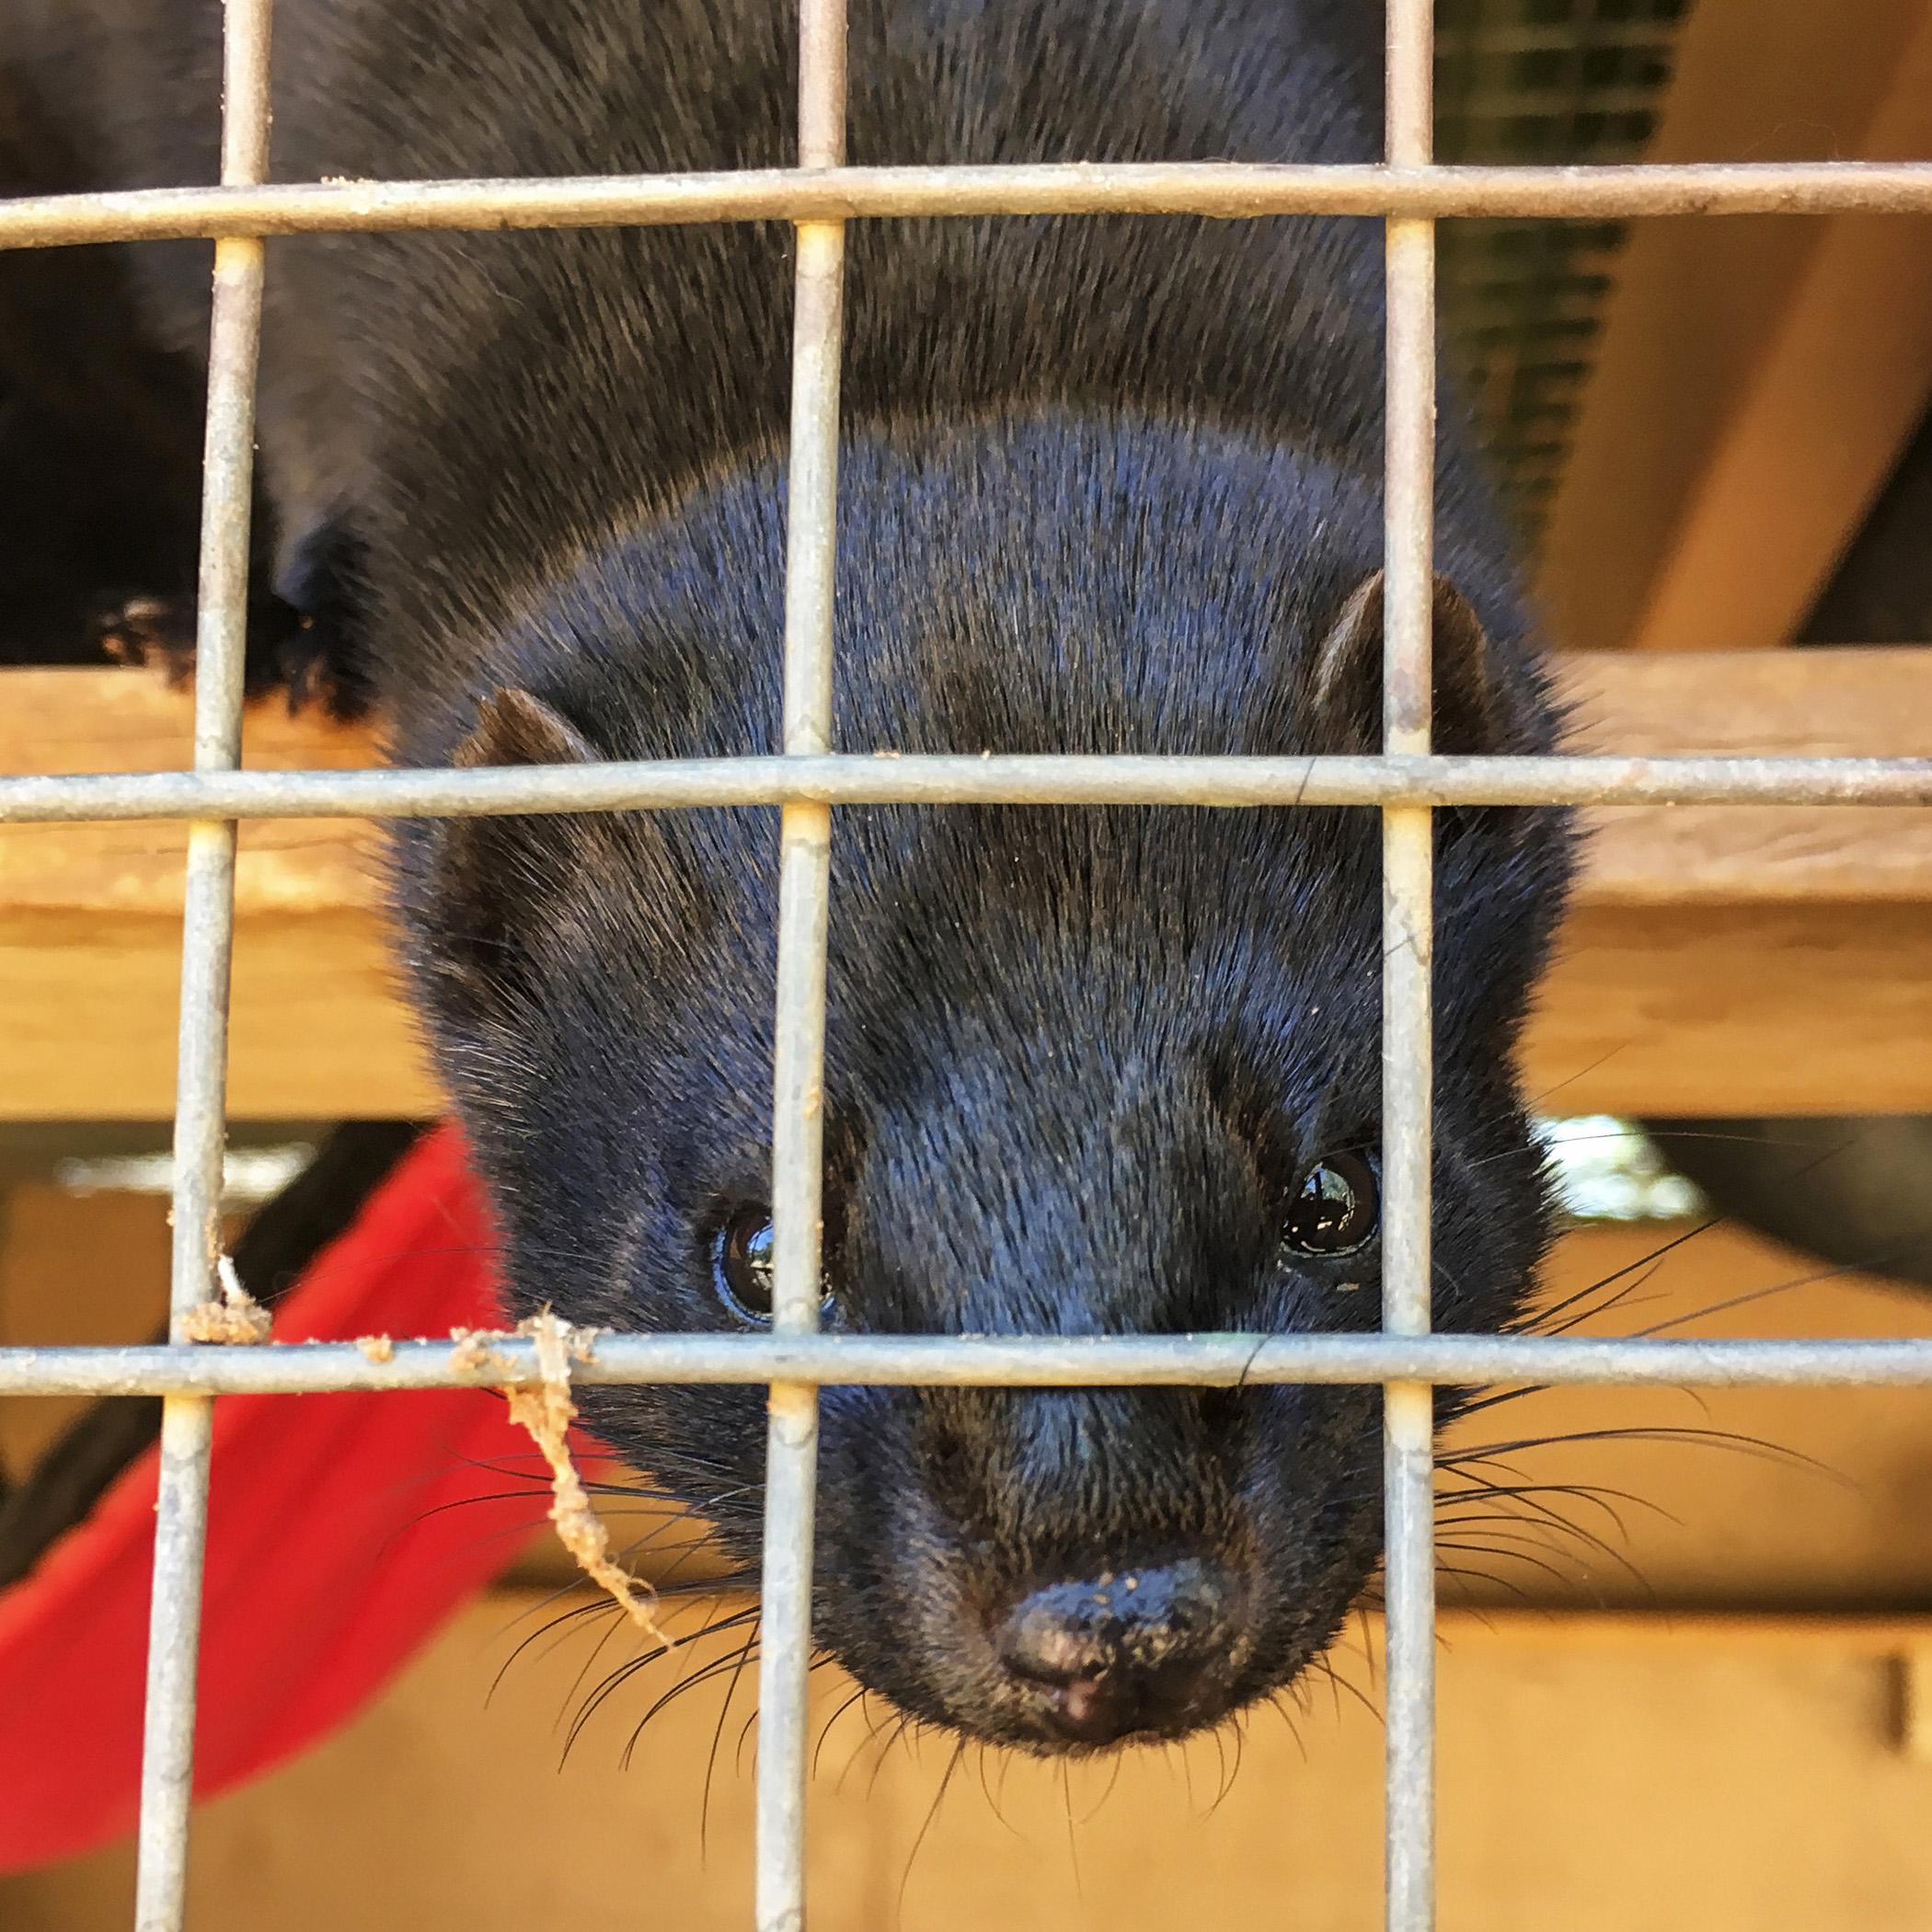  Believe it or not, there is such a thing as mink farming and breeding…for the fur. This lucky mink found his way off the farm and is now living the high life at Best Friends Sanctuary. 